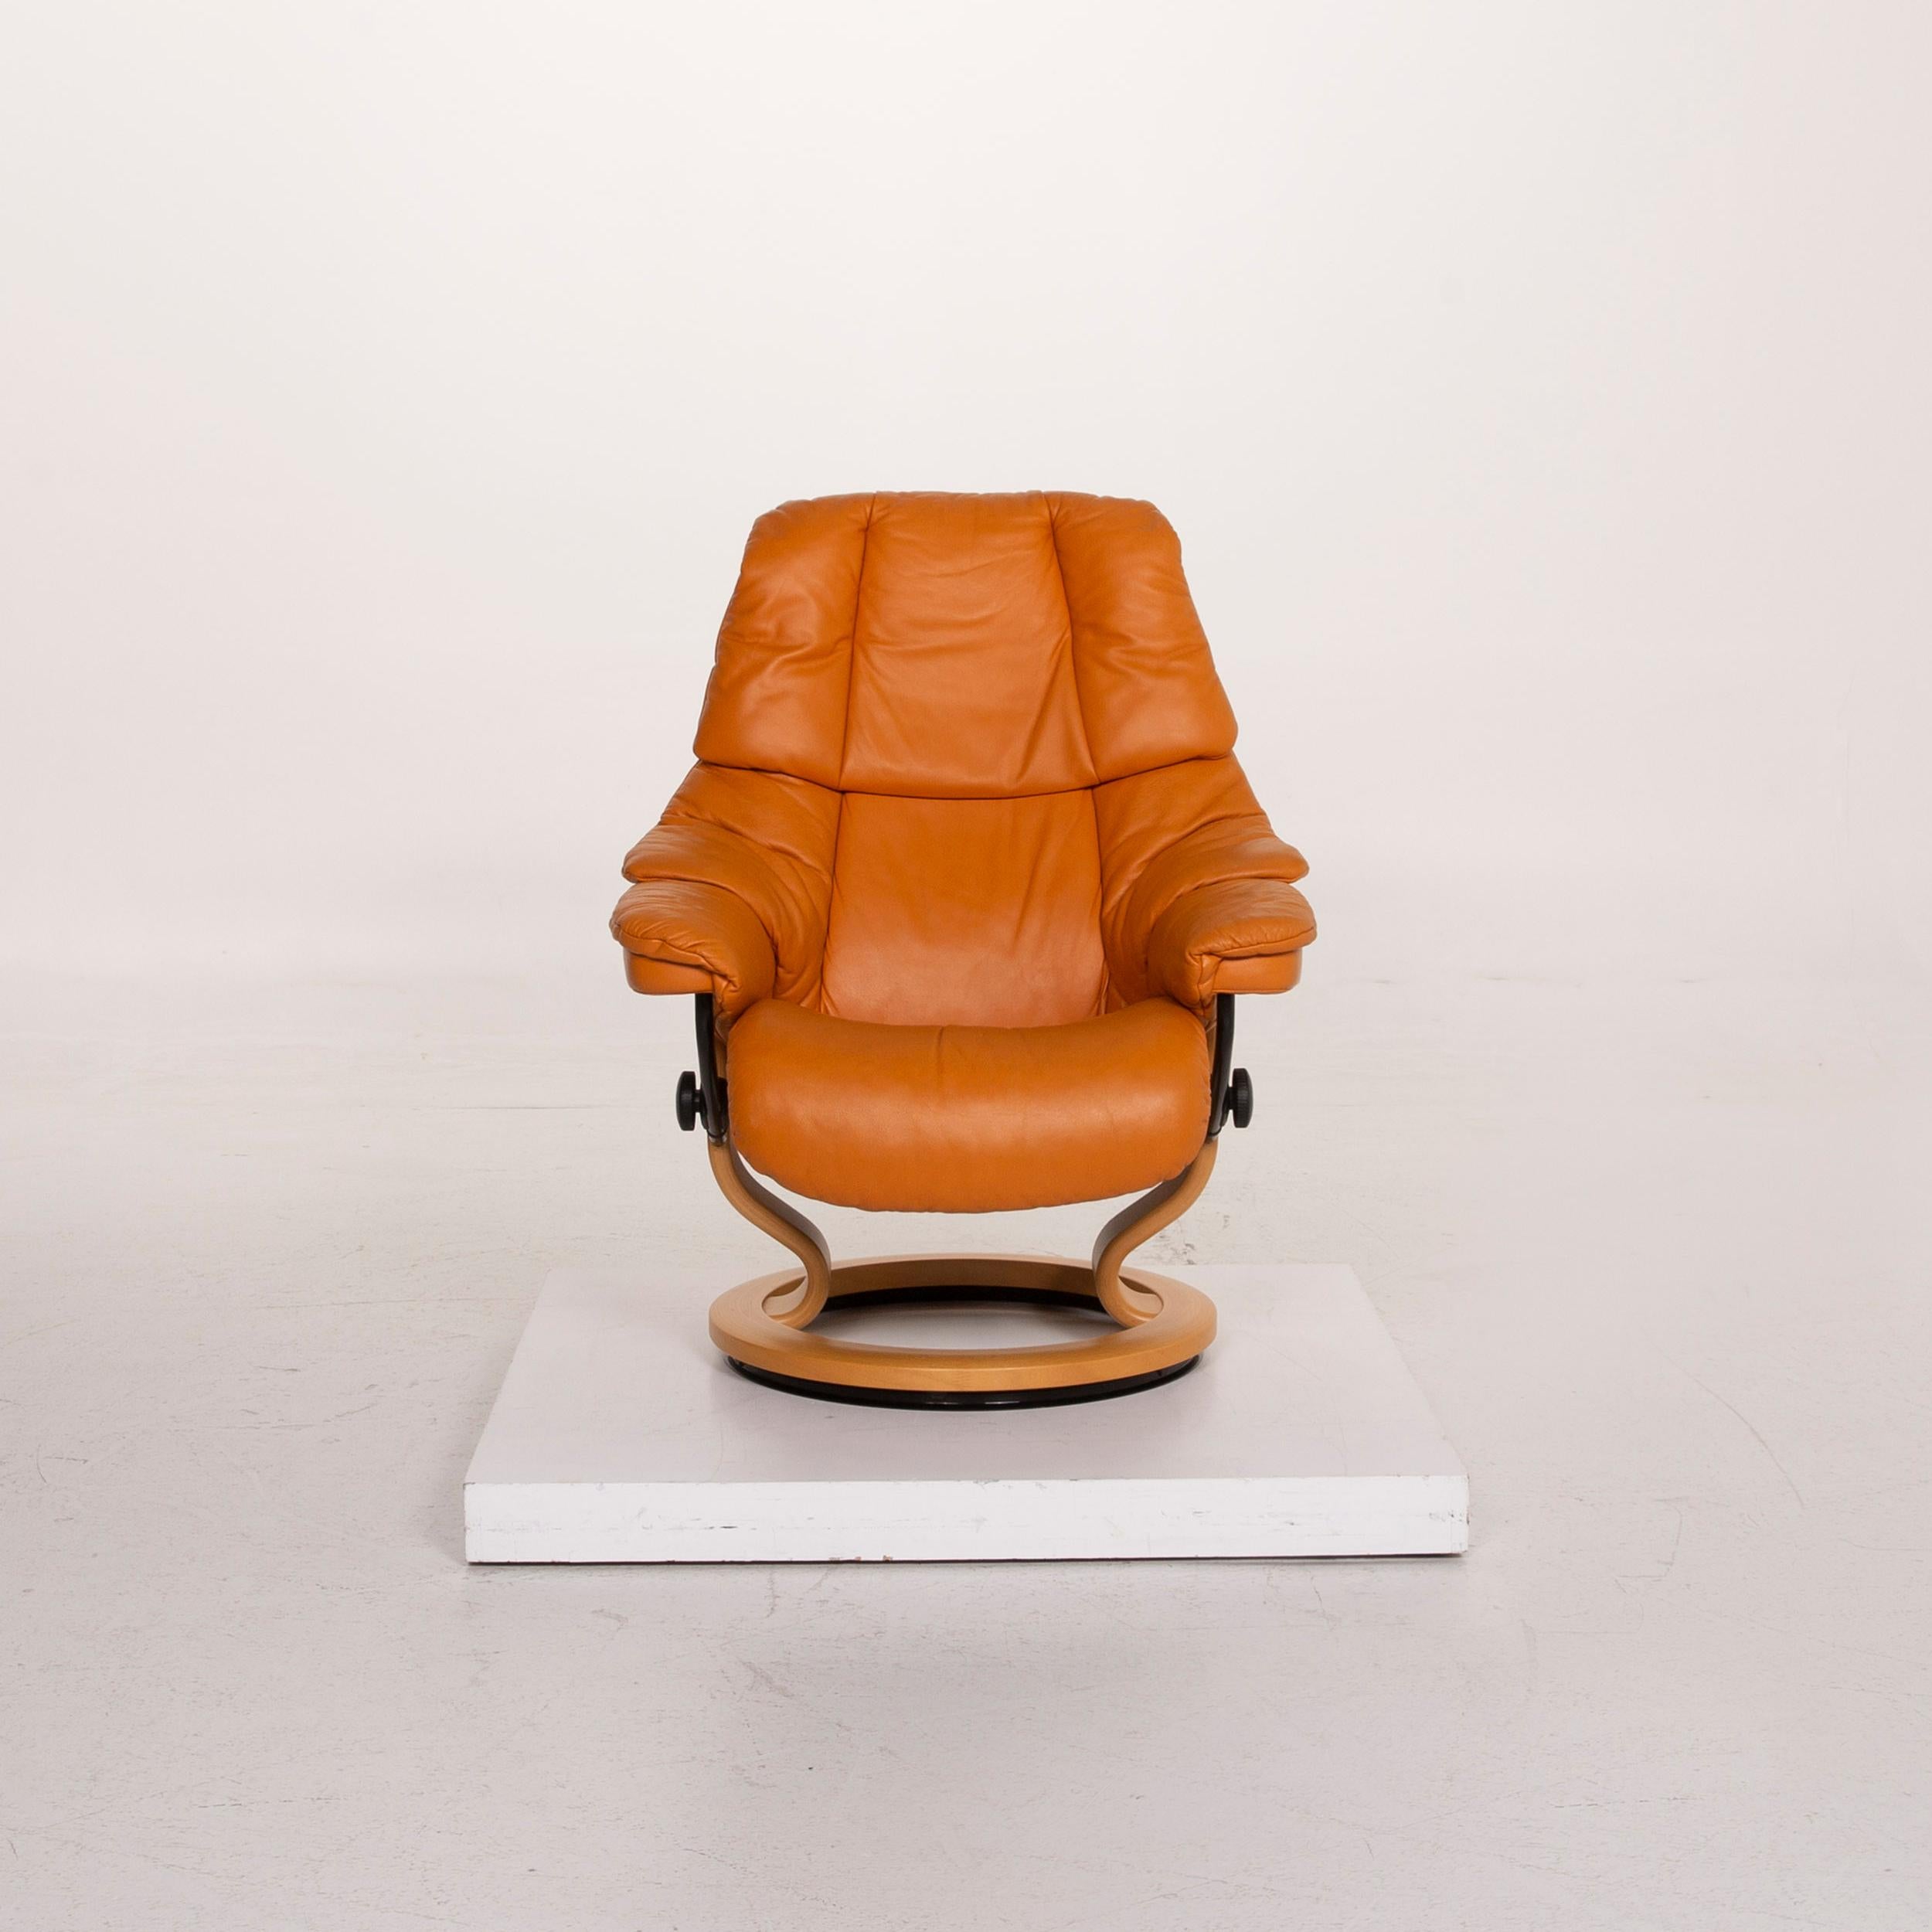 Stressless Reno Leather Armchair Orange Relax Function Incl. Stool 1